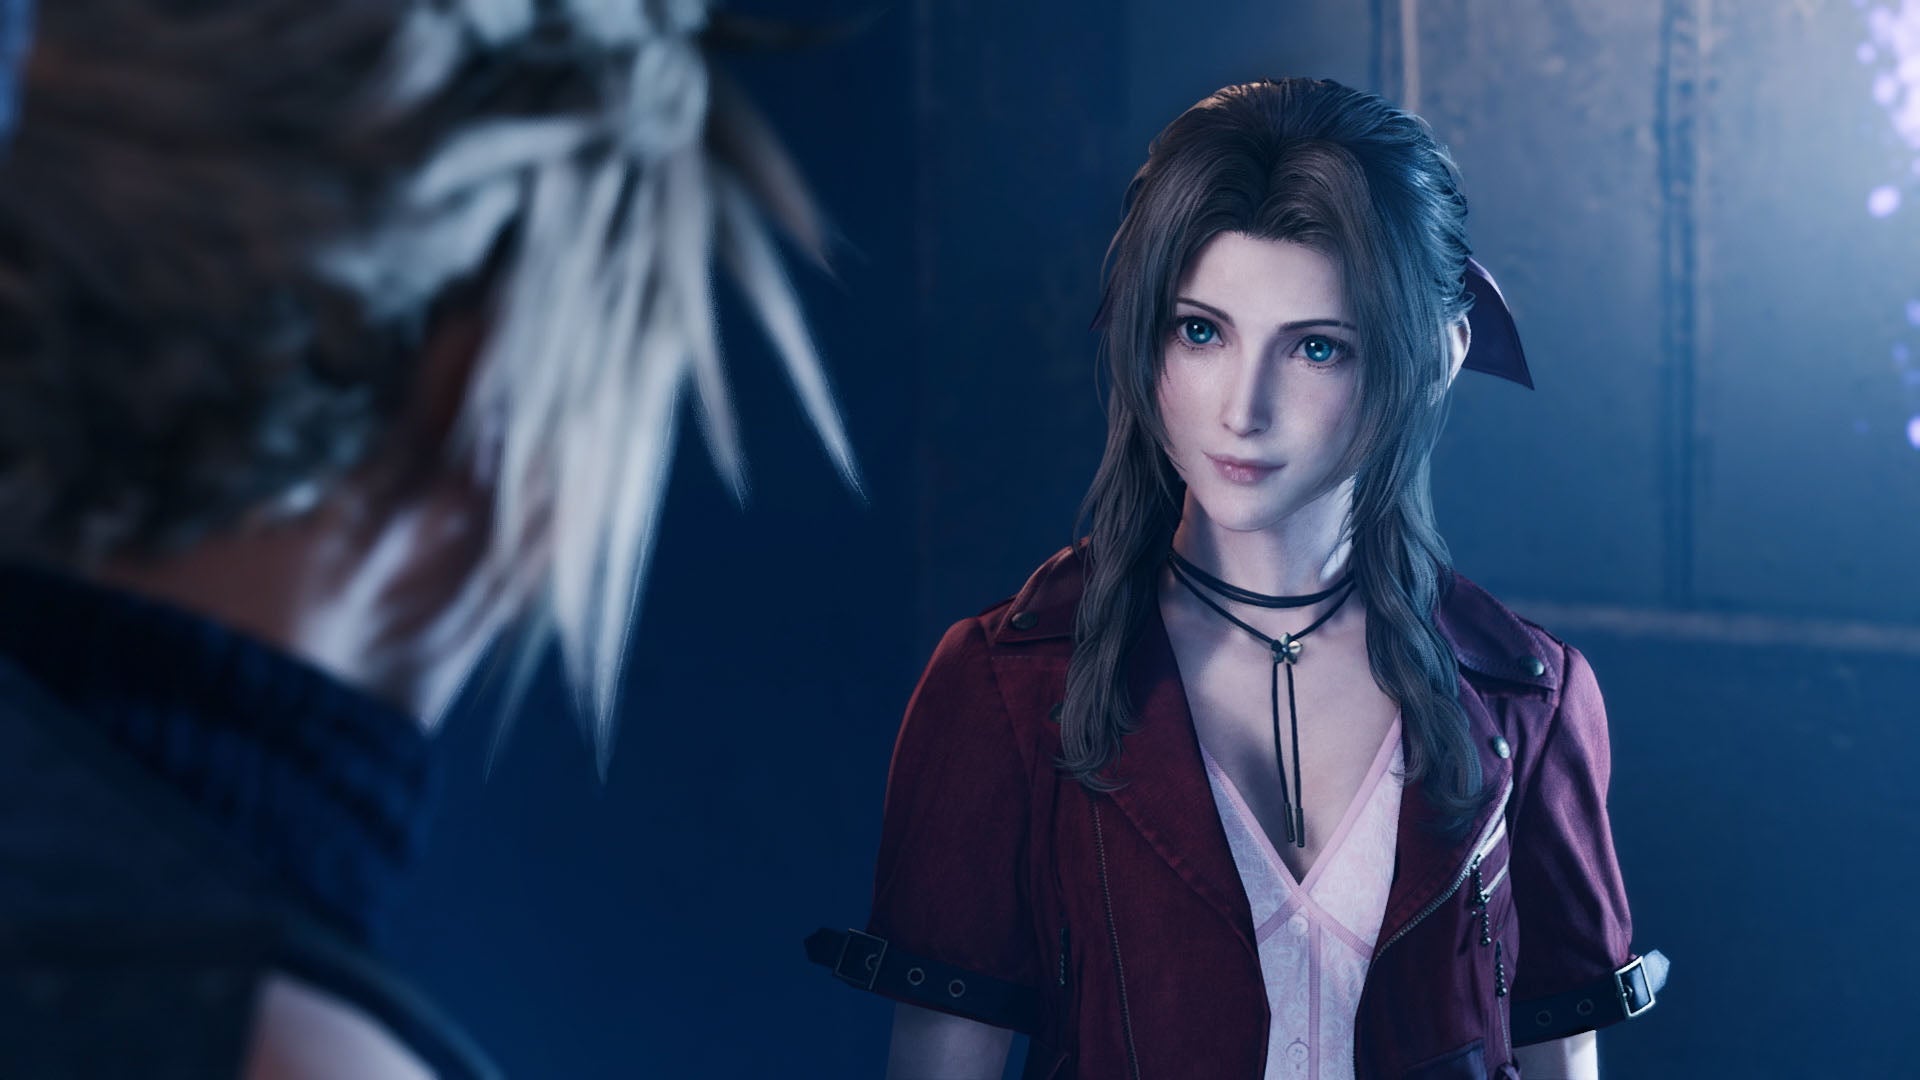 Image for PS Plus subscribers can upgrade Final Fantasy 7 remake to the PS5 version this week